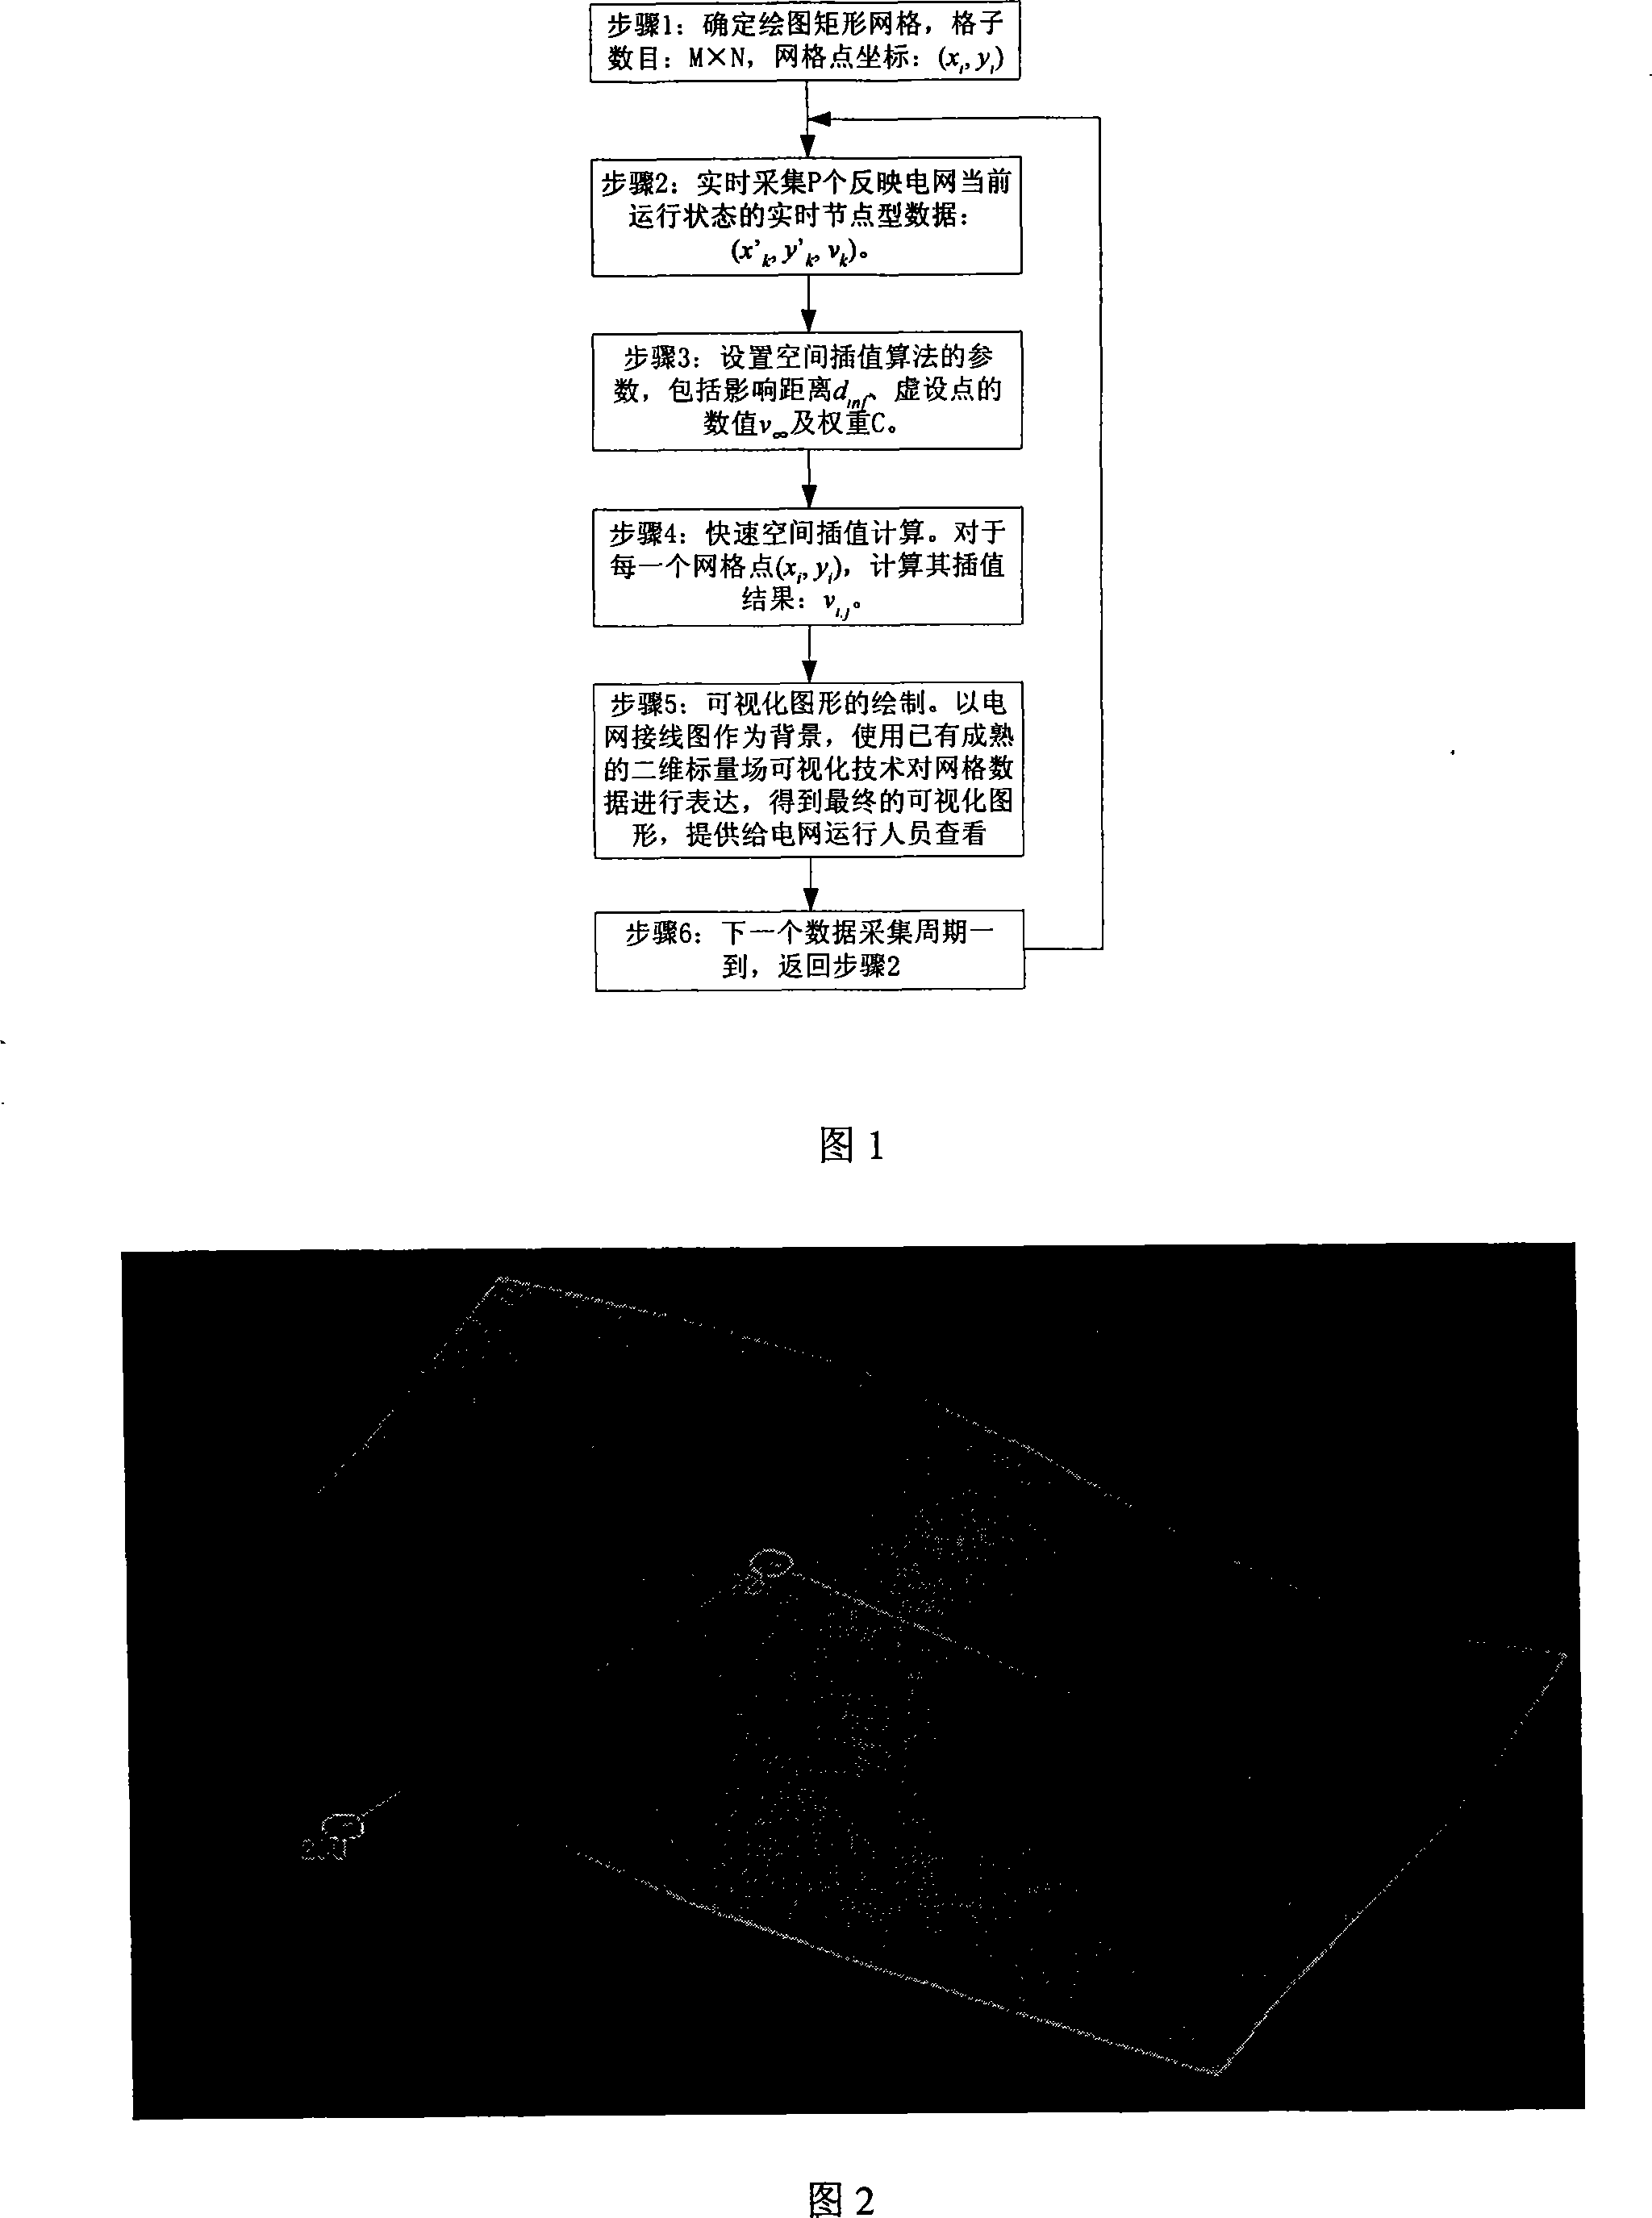 Three-dimensional visualization method for power system real time node data base on rapid space interpolation